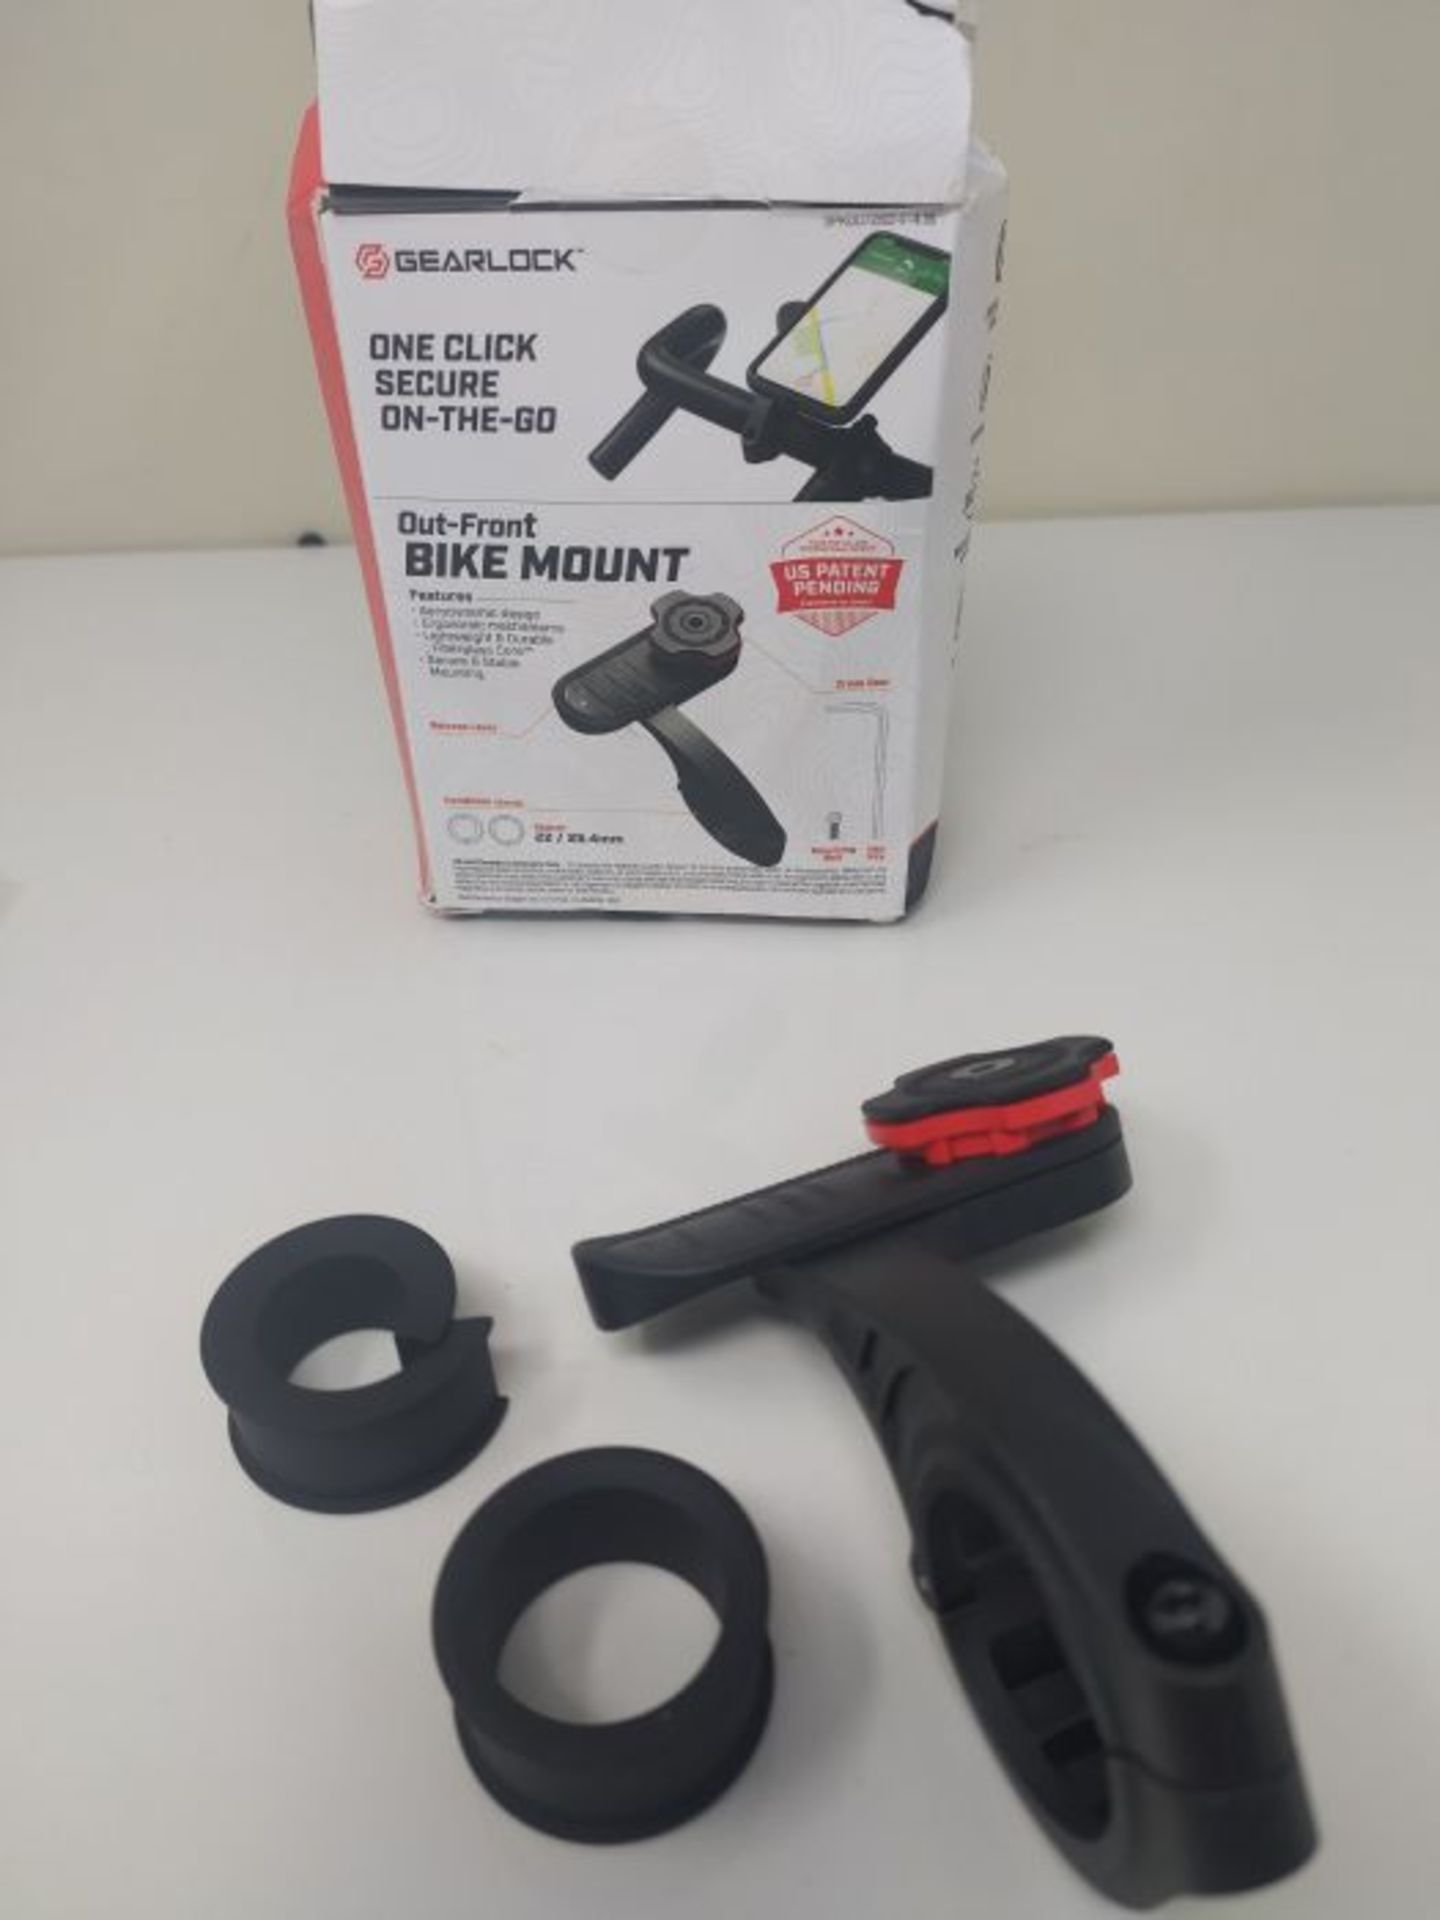 Spigen Gearlock Out Front Bike Mount with Aerodynamic Design for The Cycling Performan - Image 2 of 2